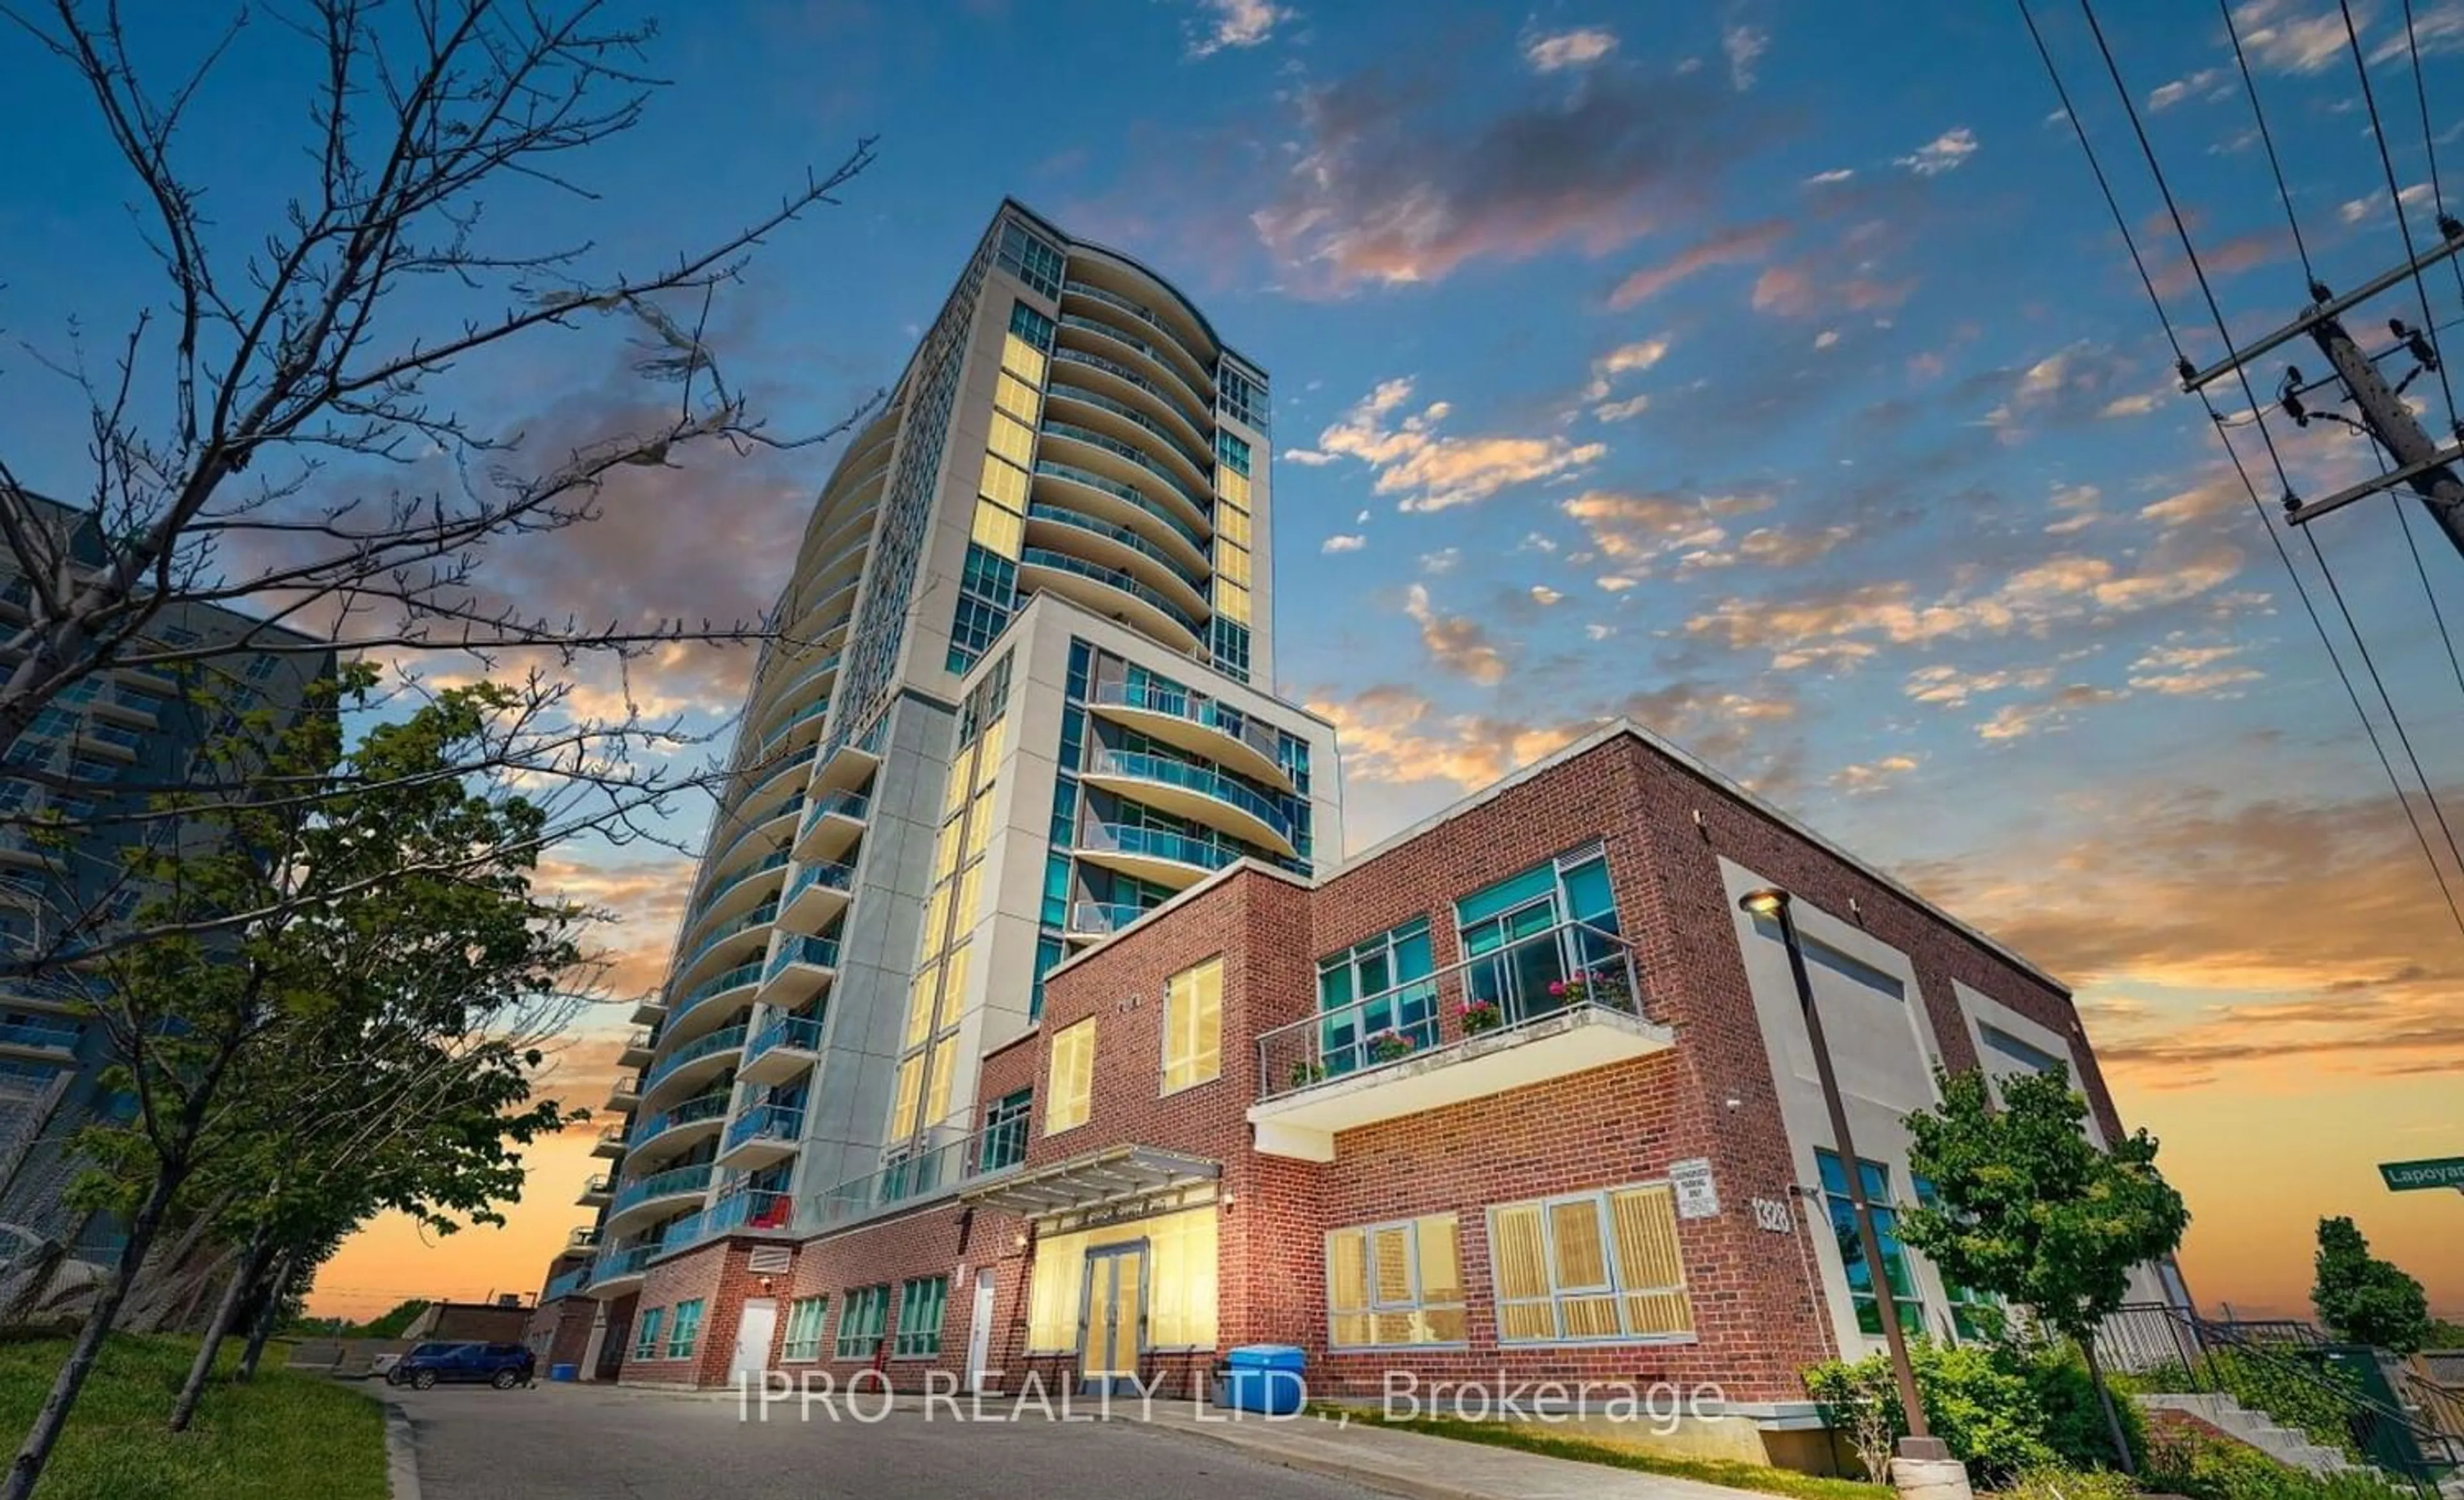 A pic from exterior of the house or condo for 1328 Birchmount Rd #609, Toronto Ontario M1R 0B6